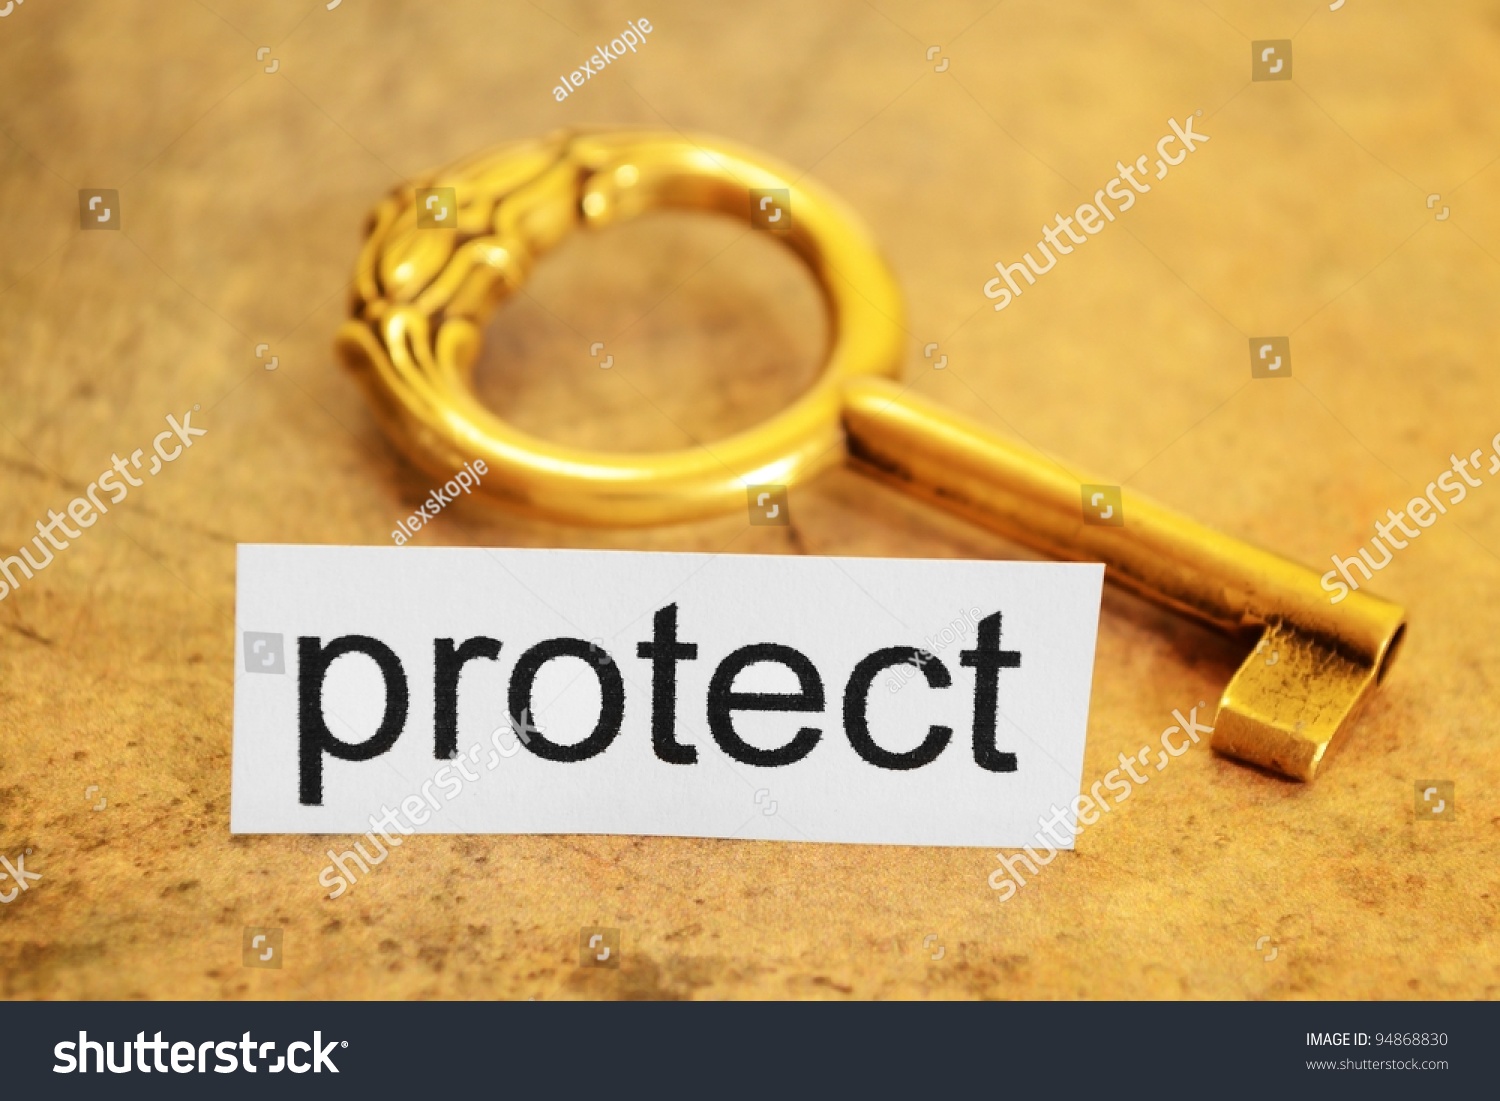 Protect and key concept #94868830